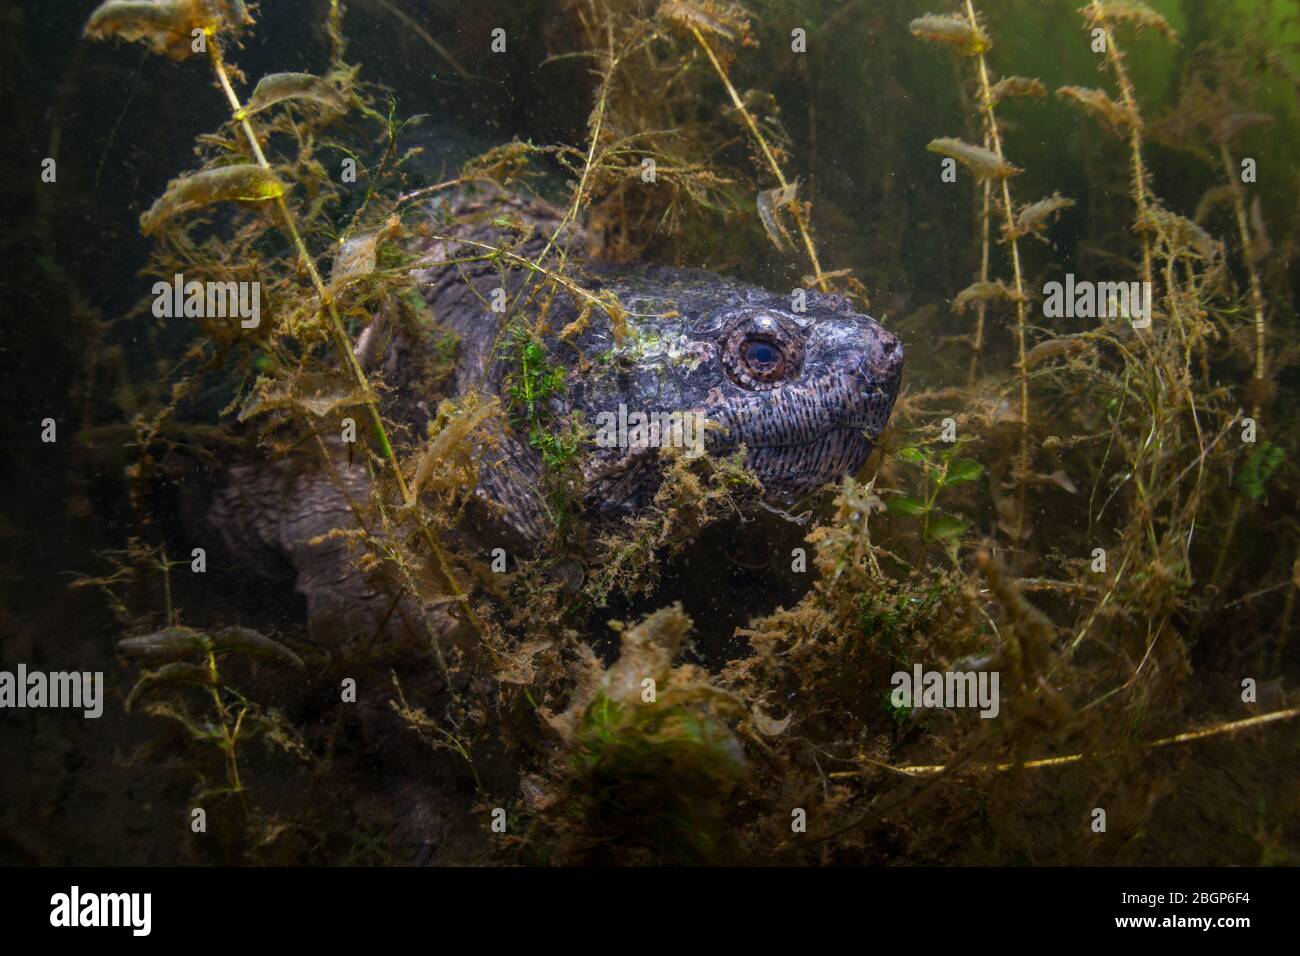 A huge Snapping turtle, Chelydra serpentina, crawls through the underwater murk and mud of a pond on Cape Cod, Massachusetts. Stock Photo